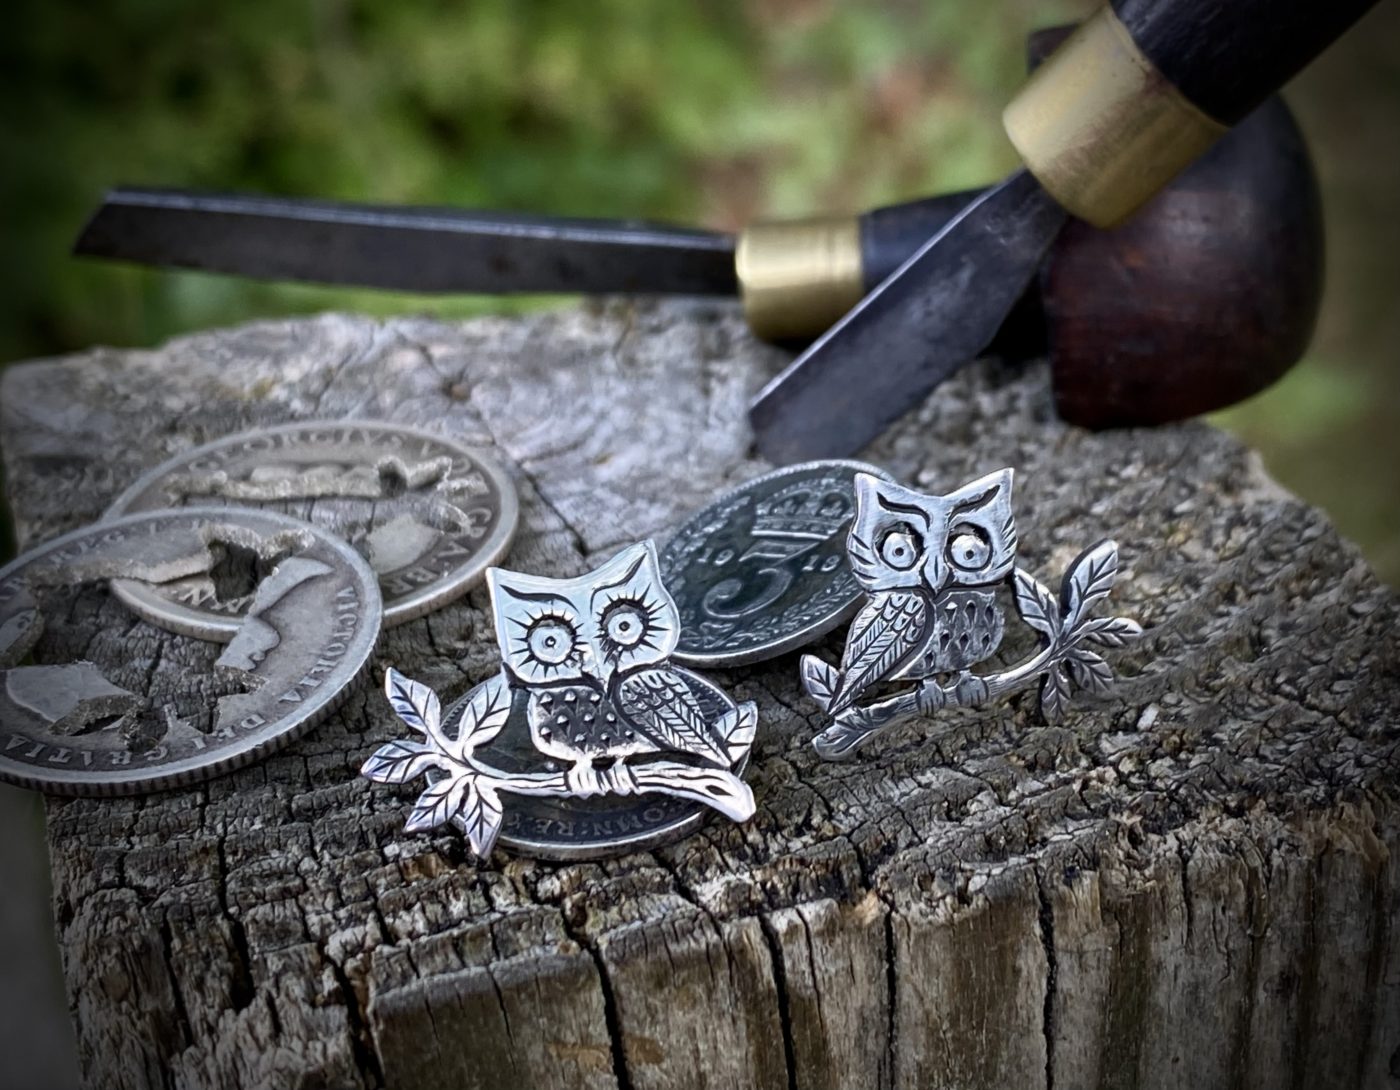 owl cufflinks handmade and upcycled from sterling silver shillings and threepence coins